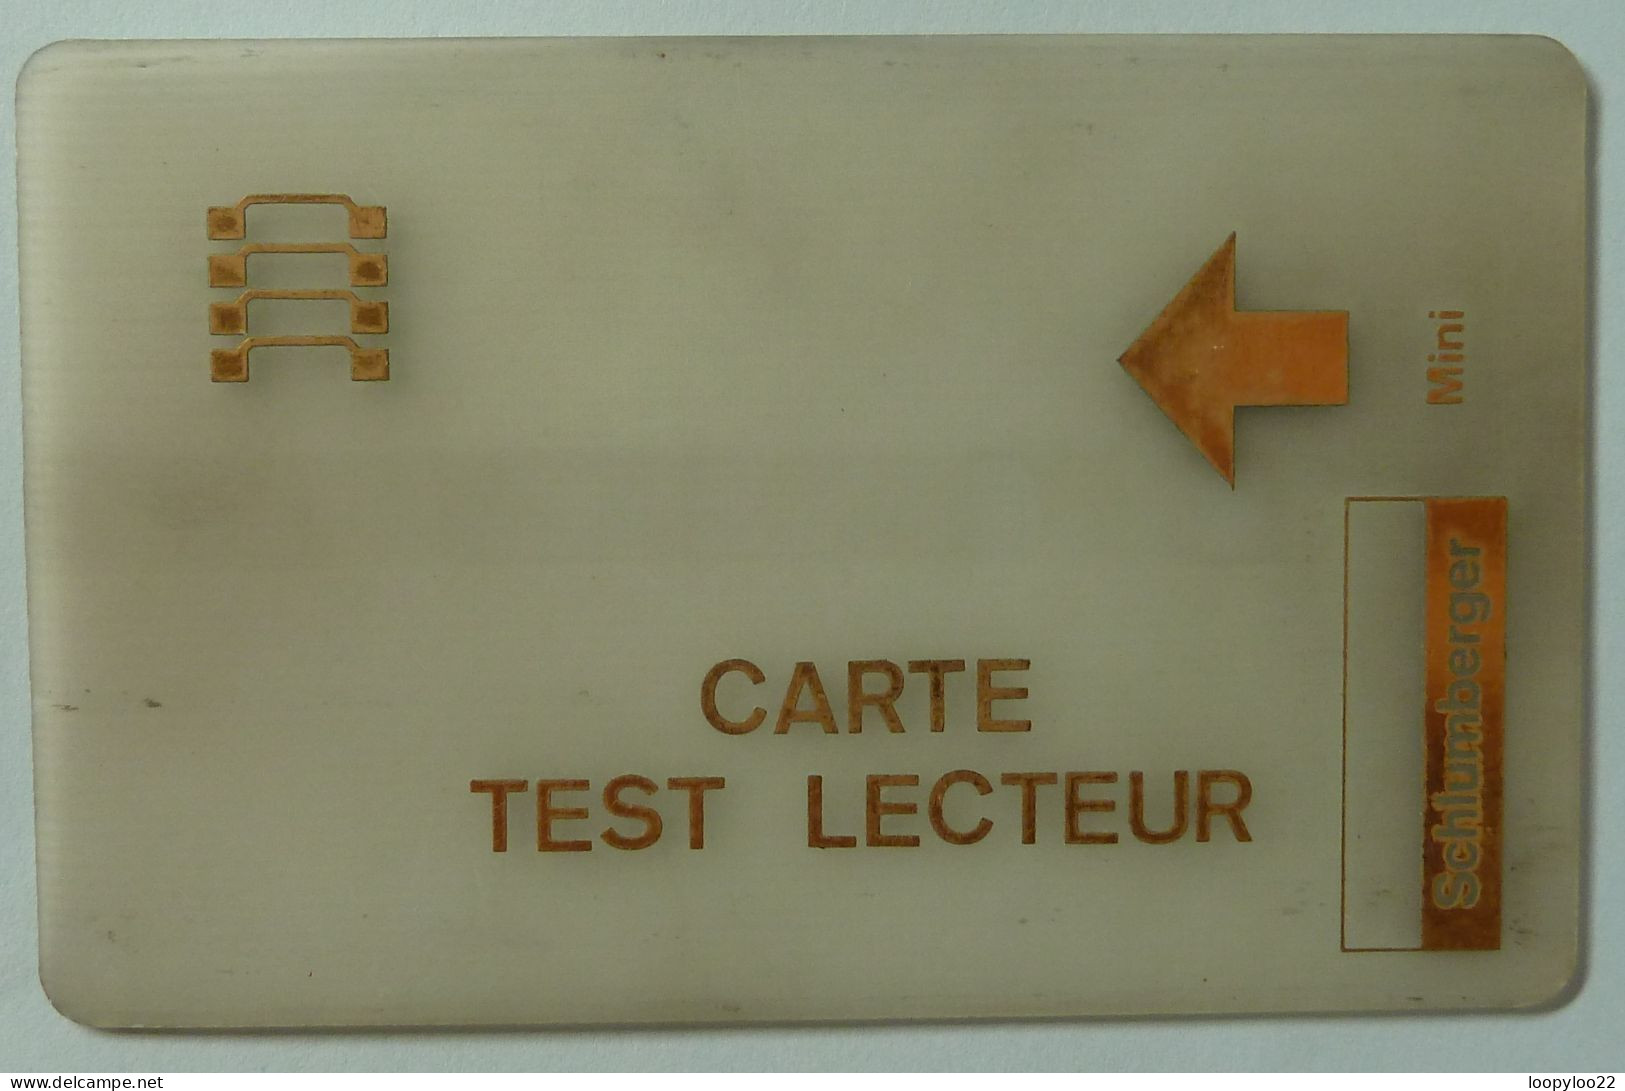 FRANCE - Test For Schlumberger - CARTE TEST LECTEUR - Used For Circuit Testing - R - Non Classificati